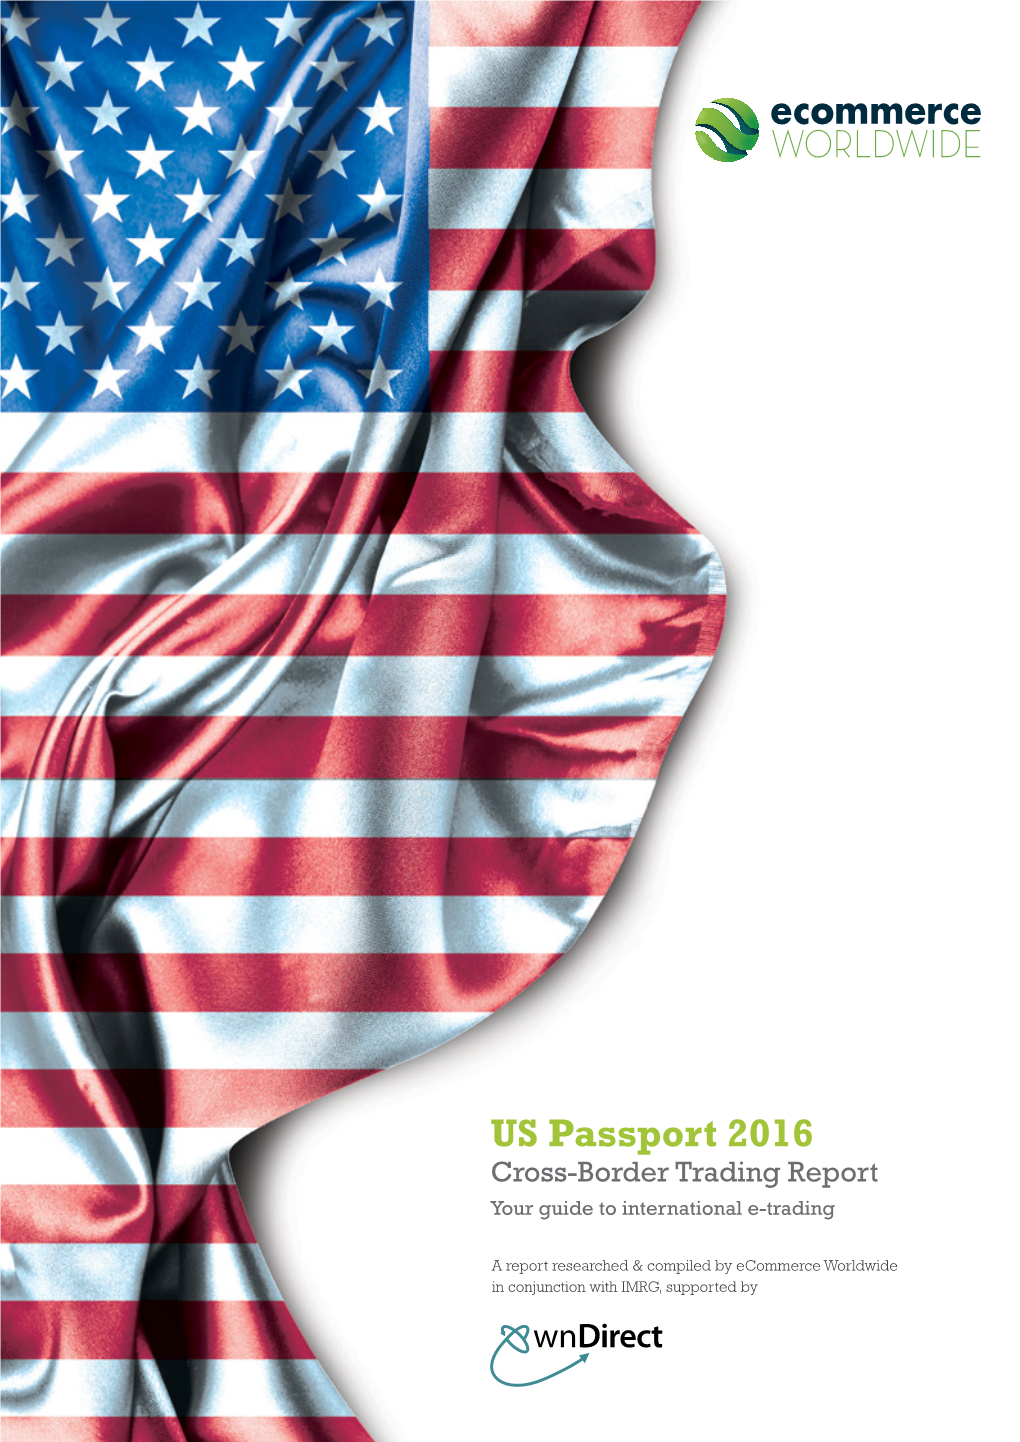 US Passport 2016 Cross-Border Trading Report Your Guide to International E-Trading